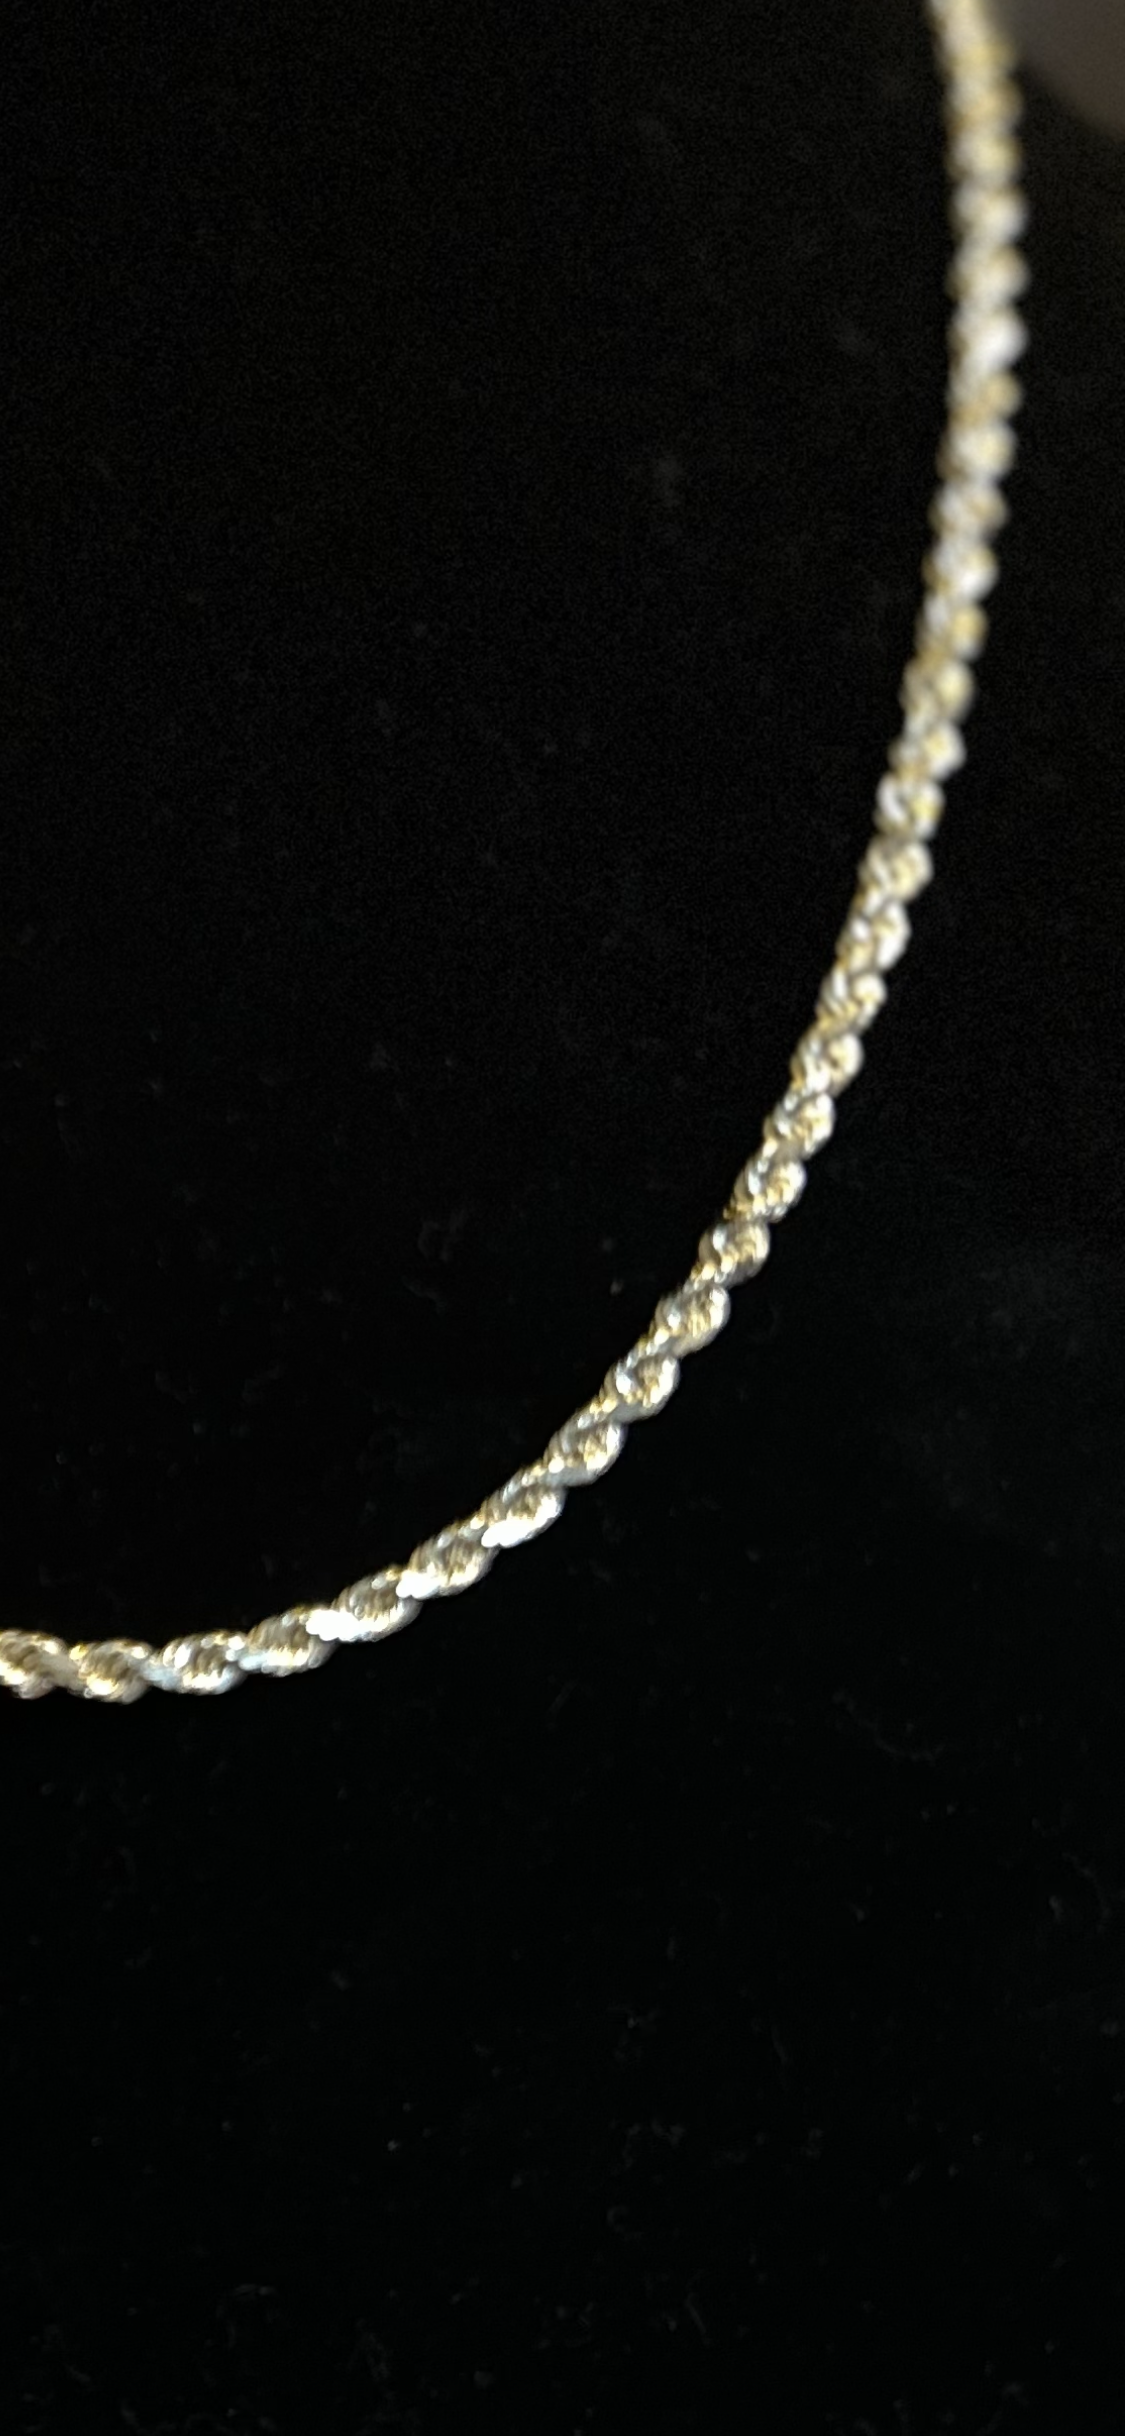 10k solid gold 4mm 22” d/c rope necklace 24.0grams